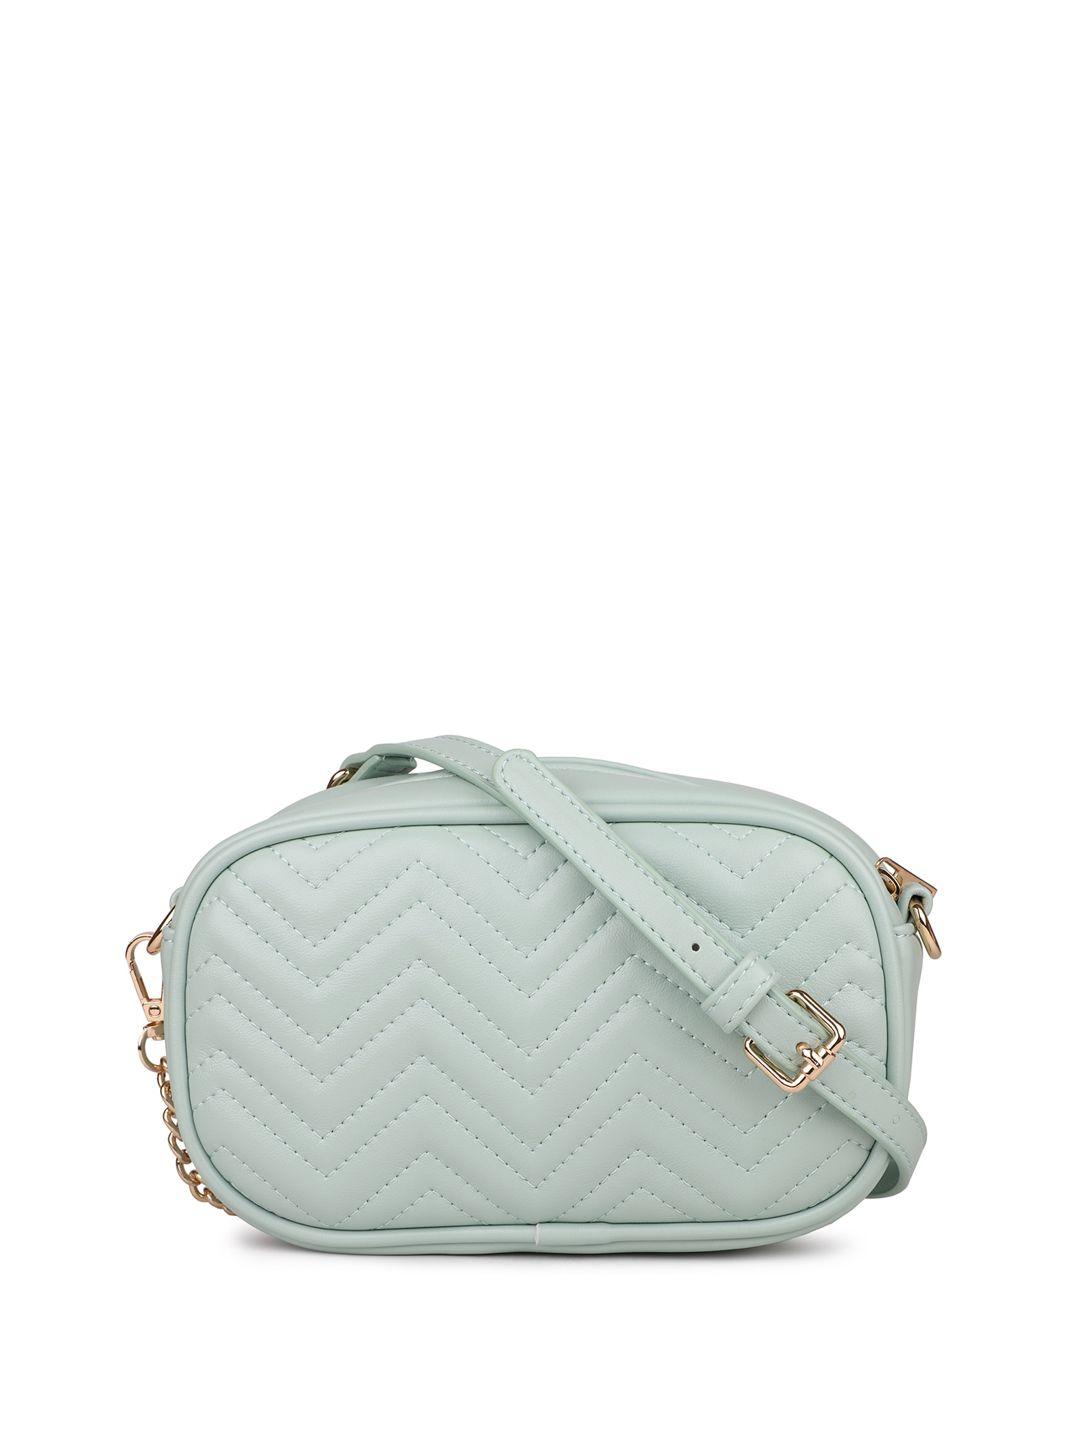 inc 5 green textured structured sling bag